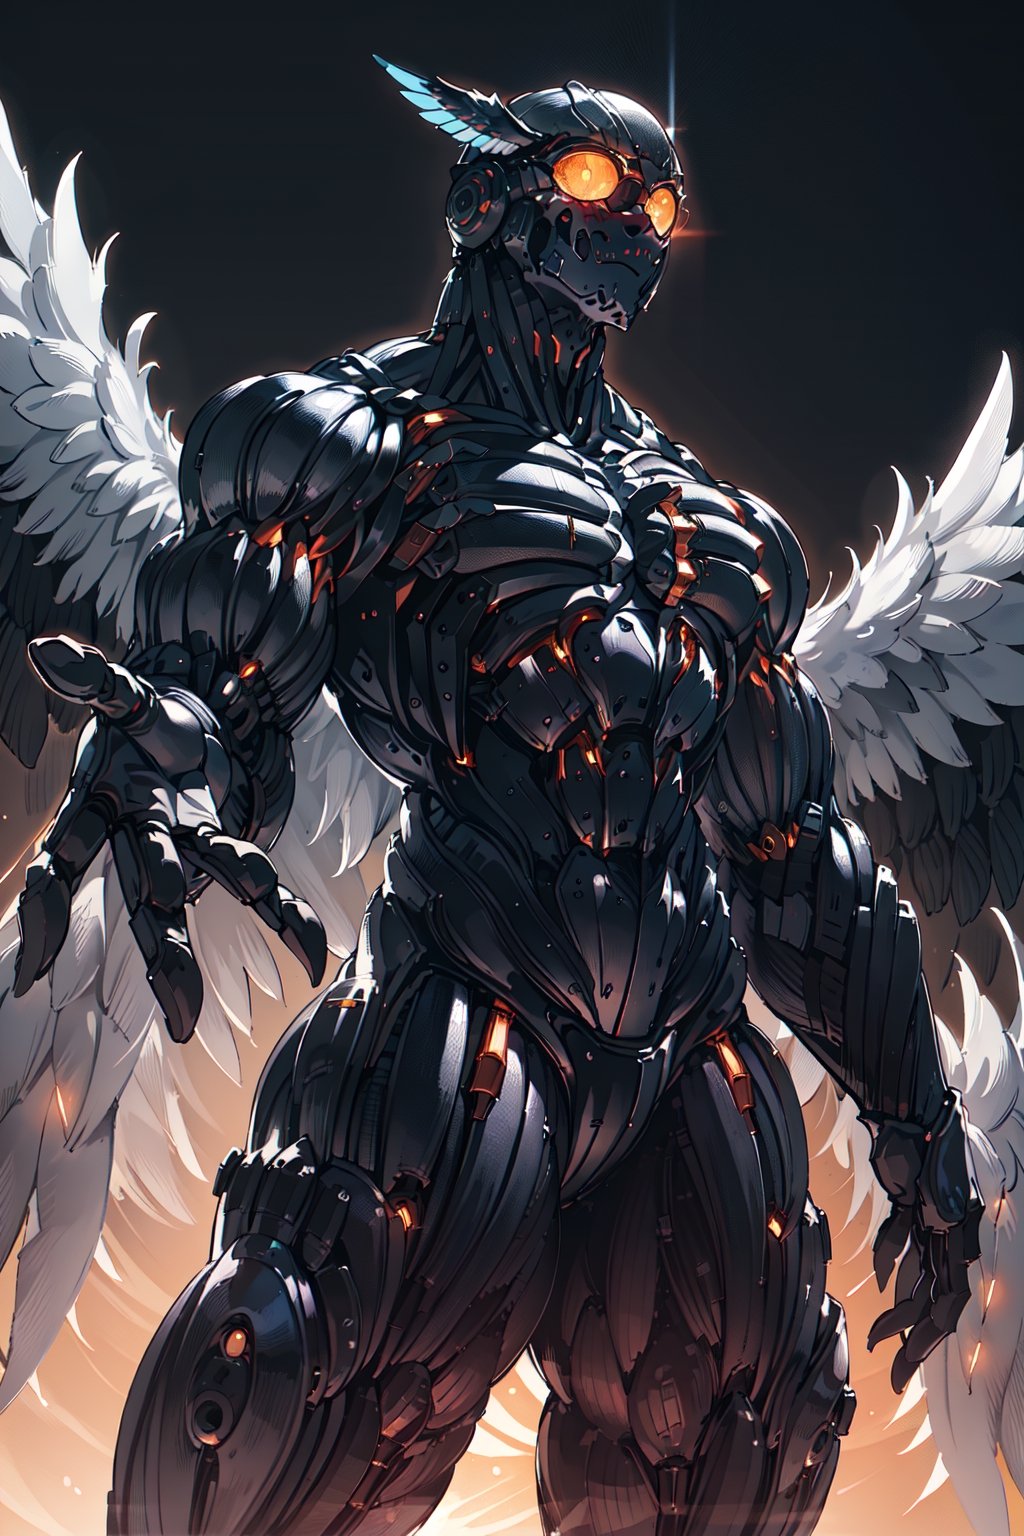 A majestic and heroic man wearing a sleek white and blue owl suit, with large and powerful wings outstretched, soaring through the night sky with a determined expression on his face. The owl suit is adorned with silver accents and glowing blue symbols, and the man's eyes shine with wisdom and courage., Lacus Attire 1